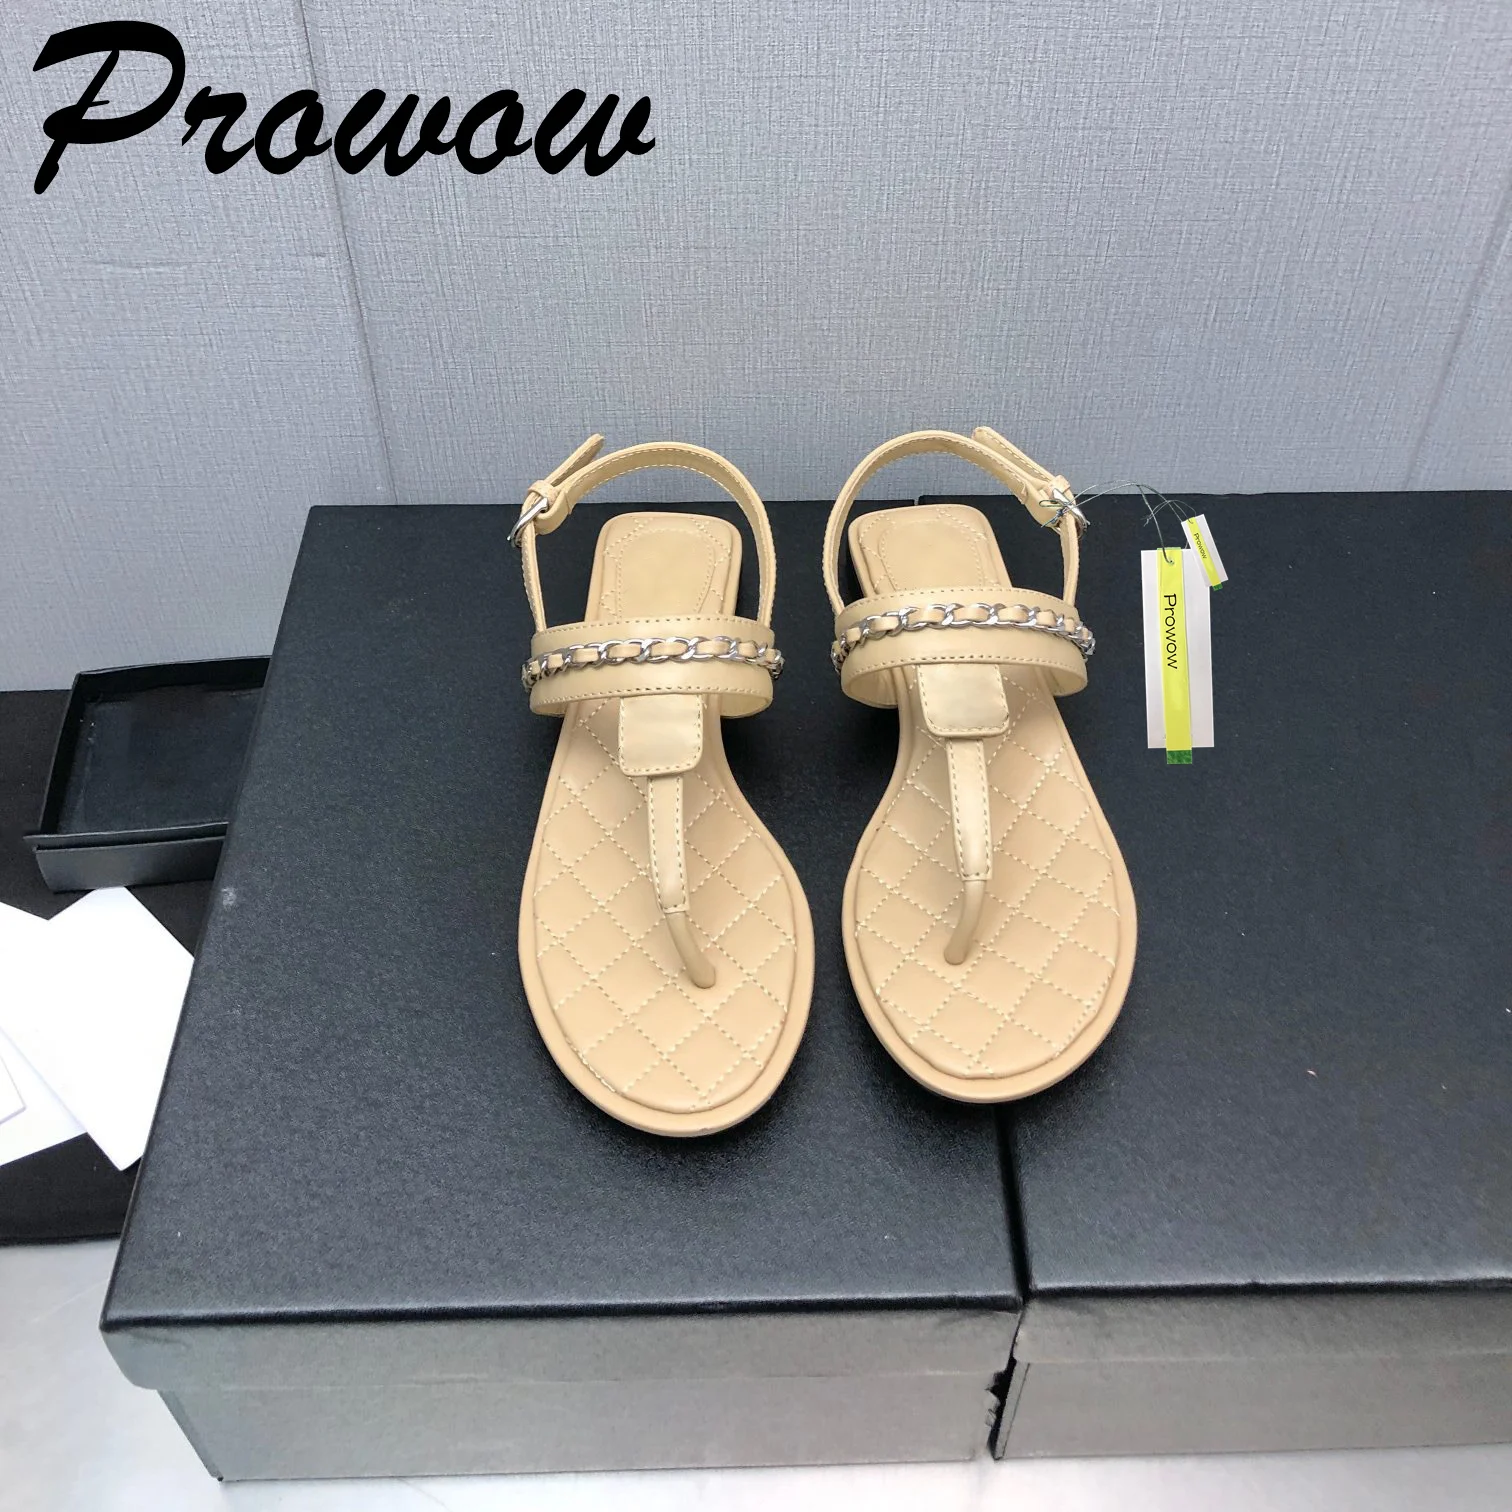 

Prowow New Genuine Leather Metal Chain Branded Sandals Ankle Strap Summer Vacation Flats Sandals Zapatos Mujer